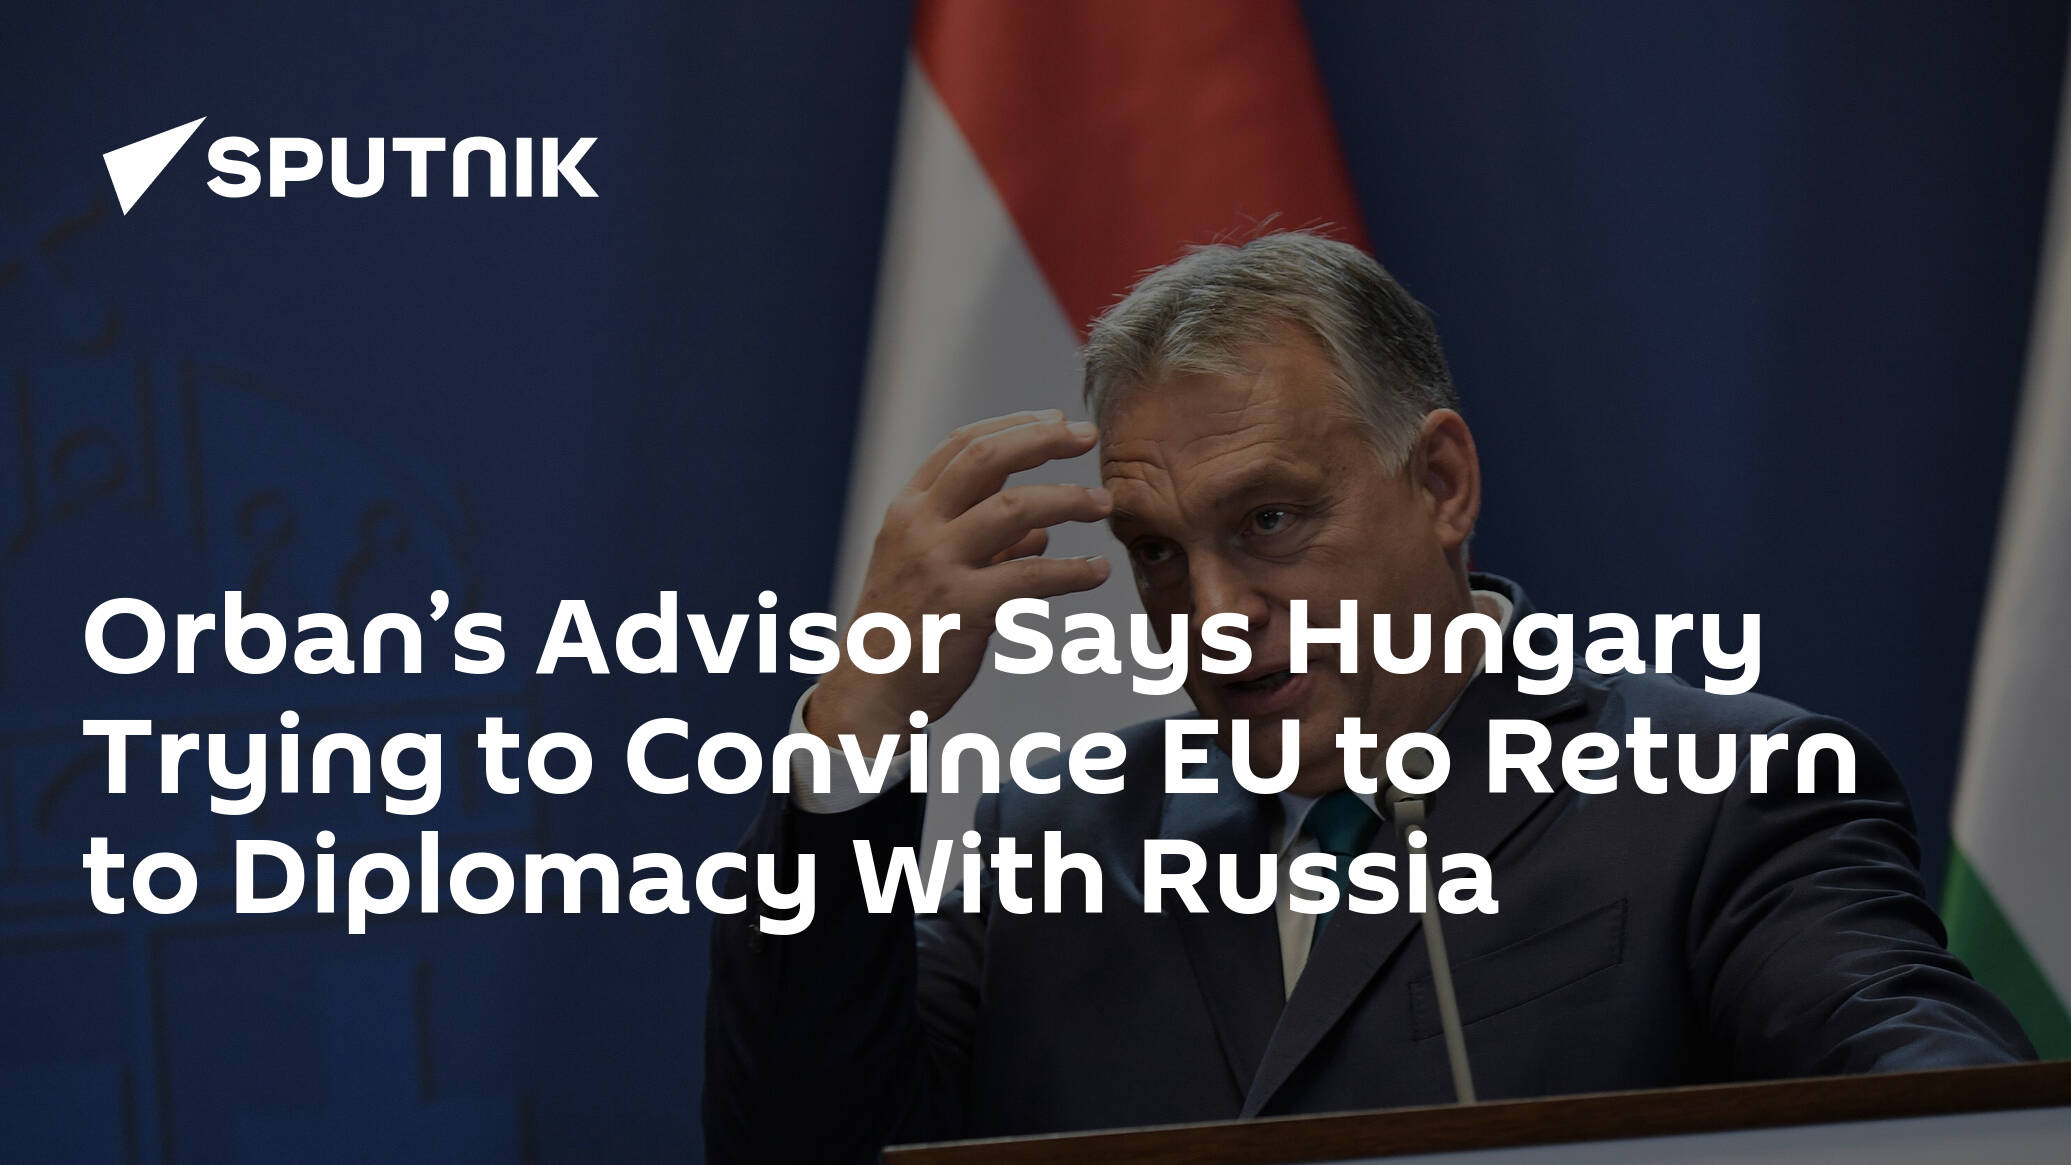 Orban’s Advisor Says Hungary Trying to Convince EU to Return to Diplomacy With Russia